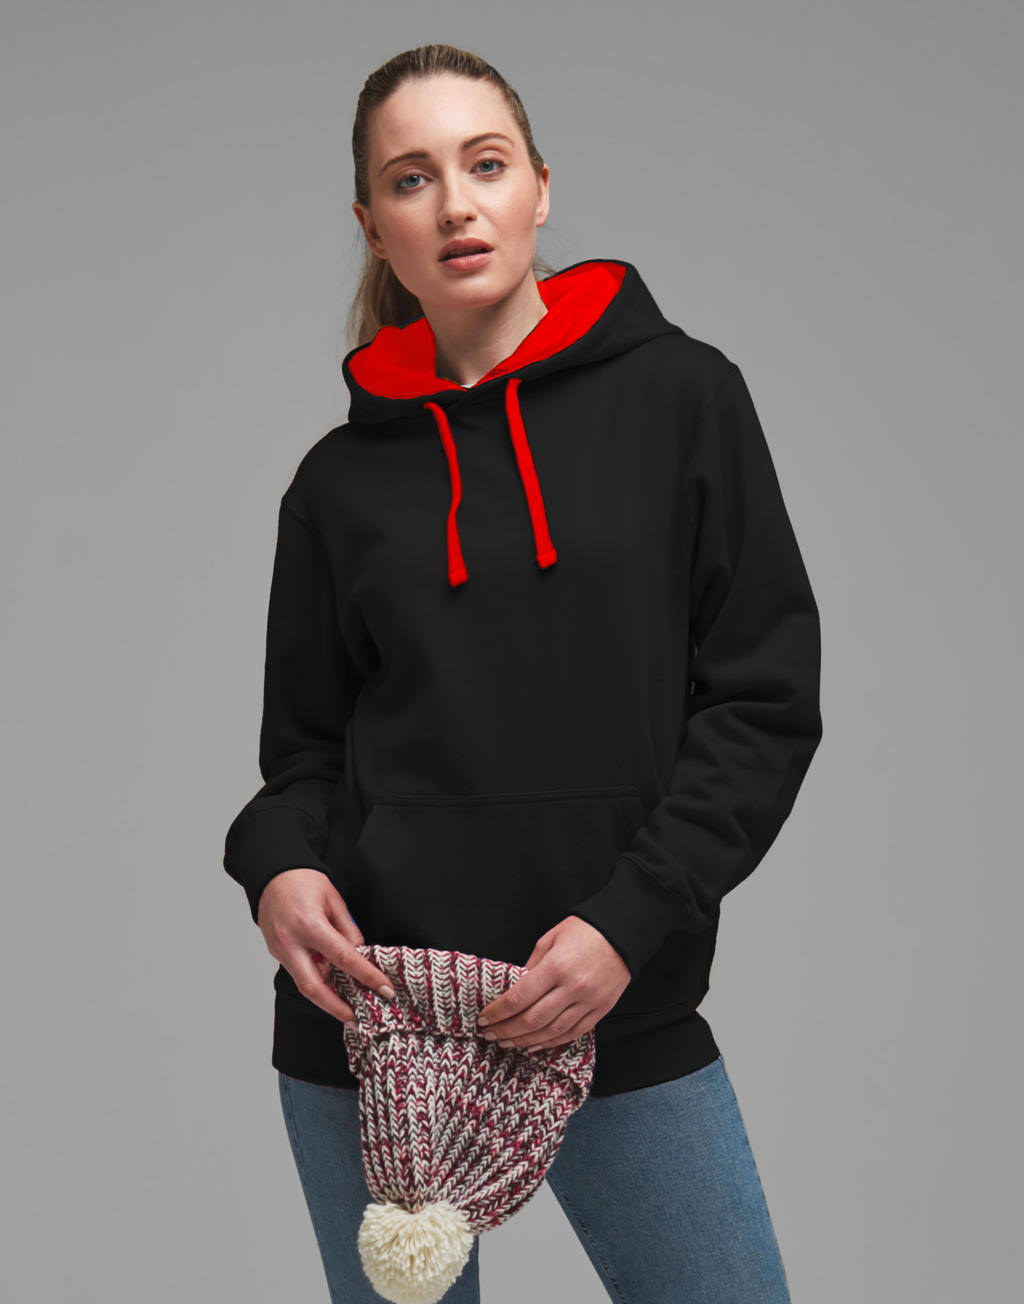  Contrast Hoodie in Farbe Black/Fire Red